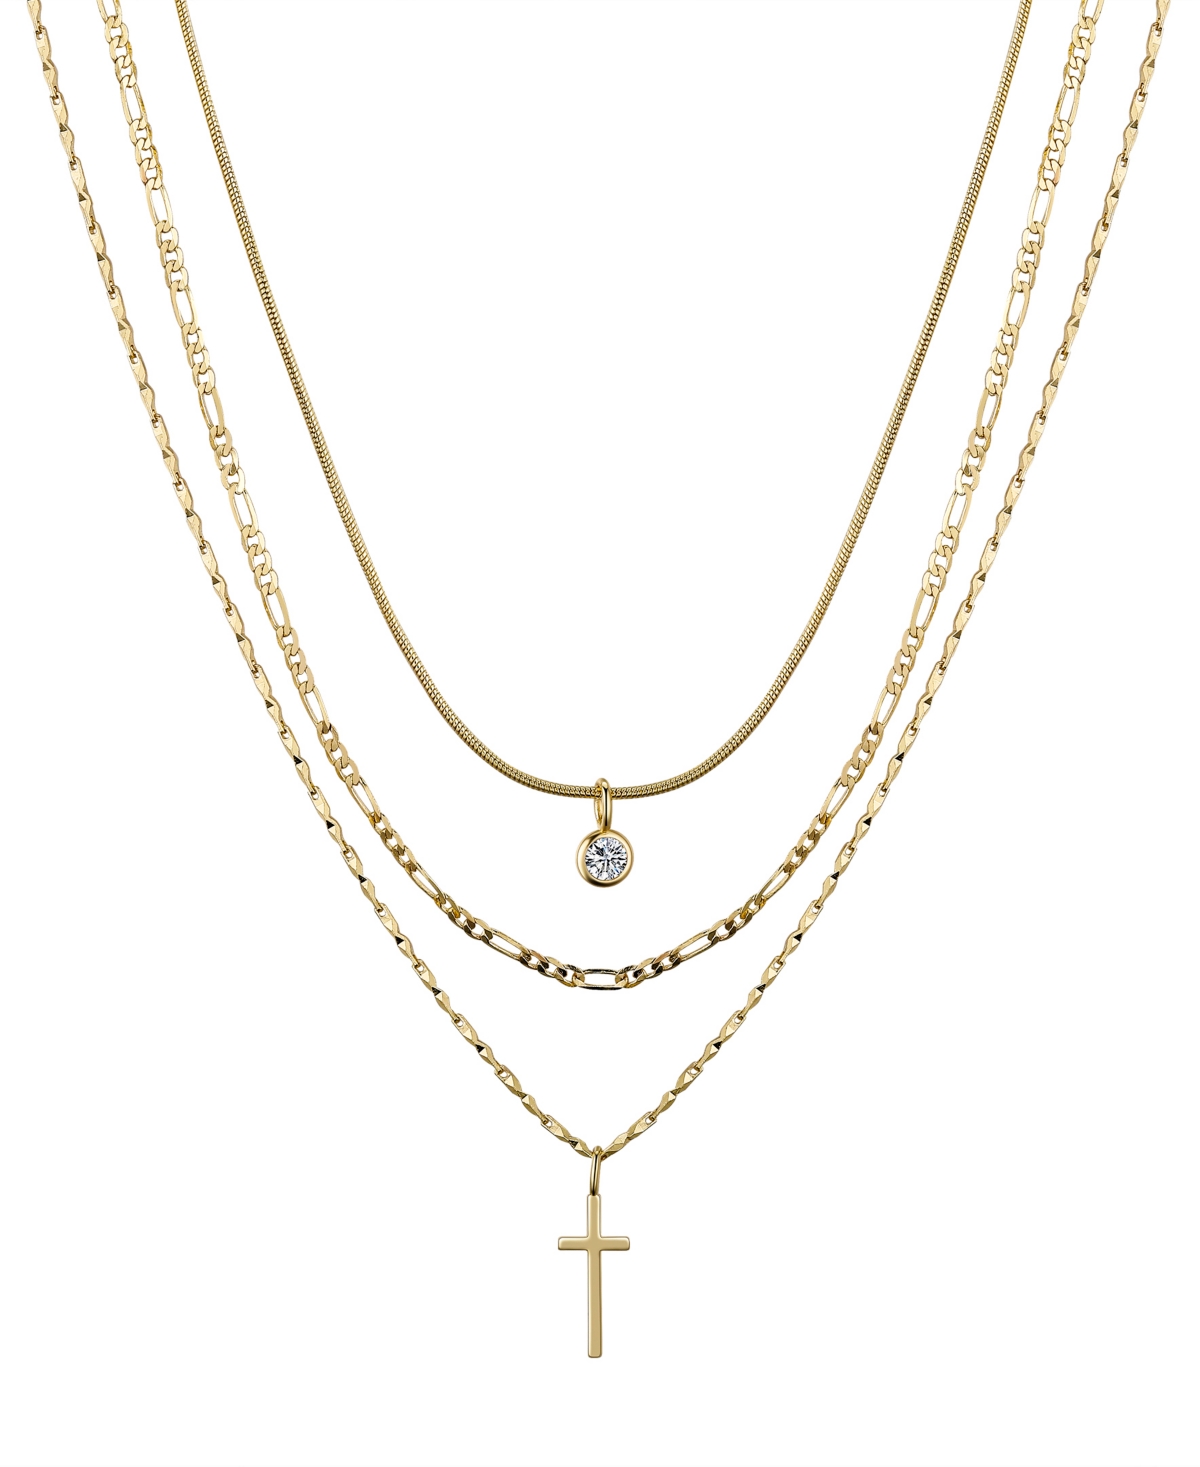 Unwritten Cubic Zirconia Bezel And 14k Gold Plated Cross Pendant Layered Necklace Set, 3 Pieces